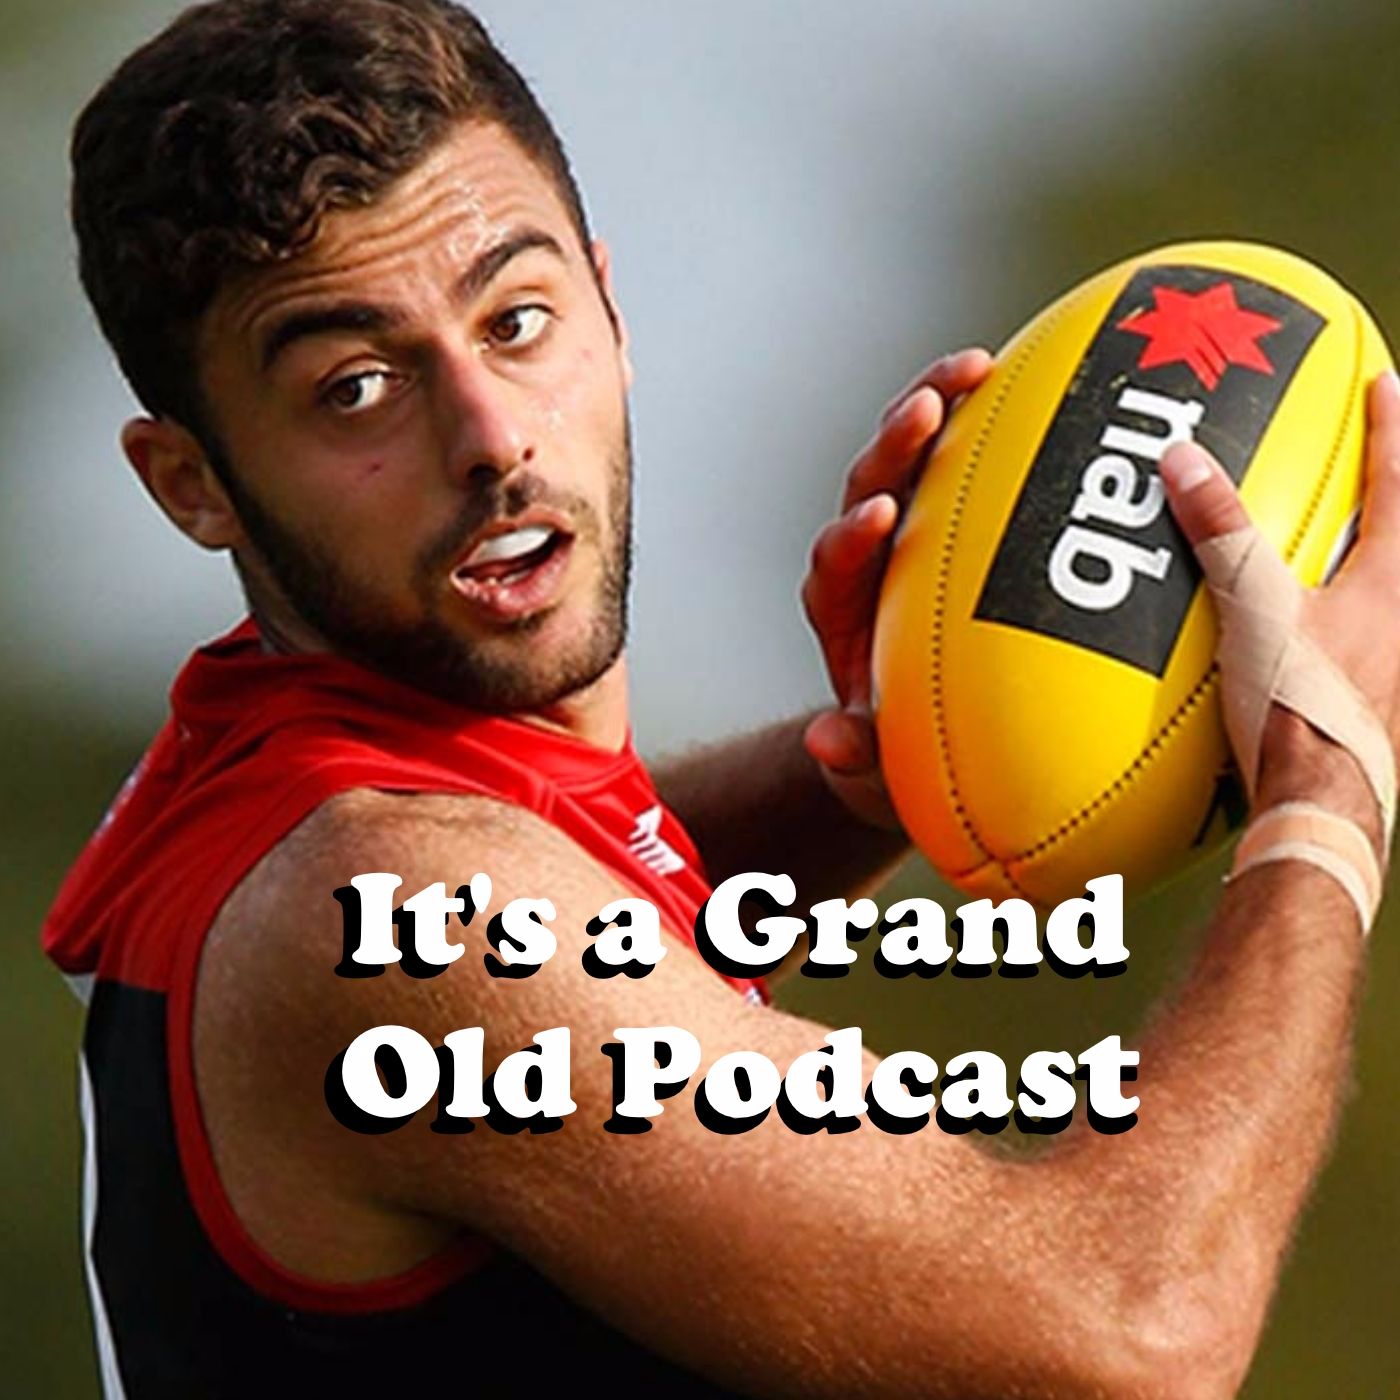 It's a Grand Old Podcast